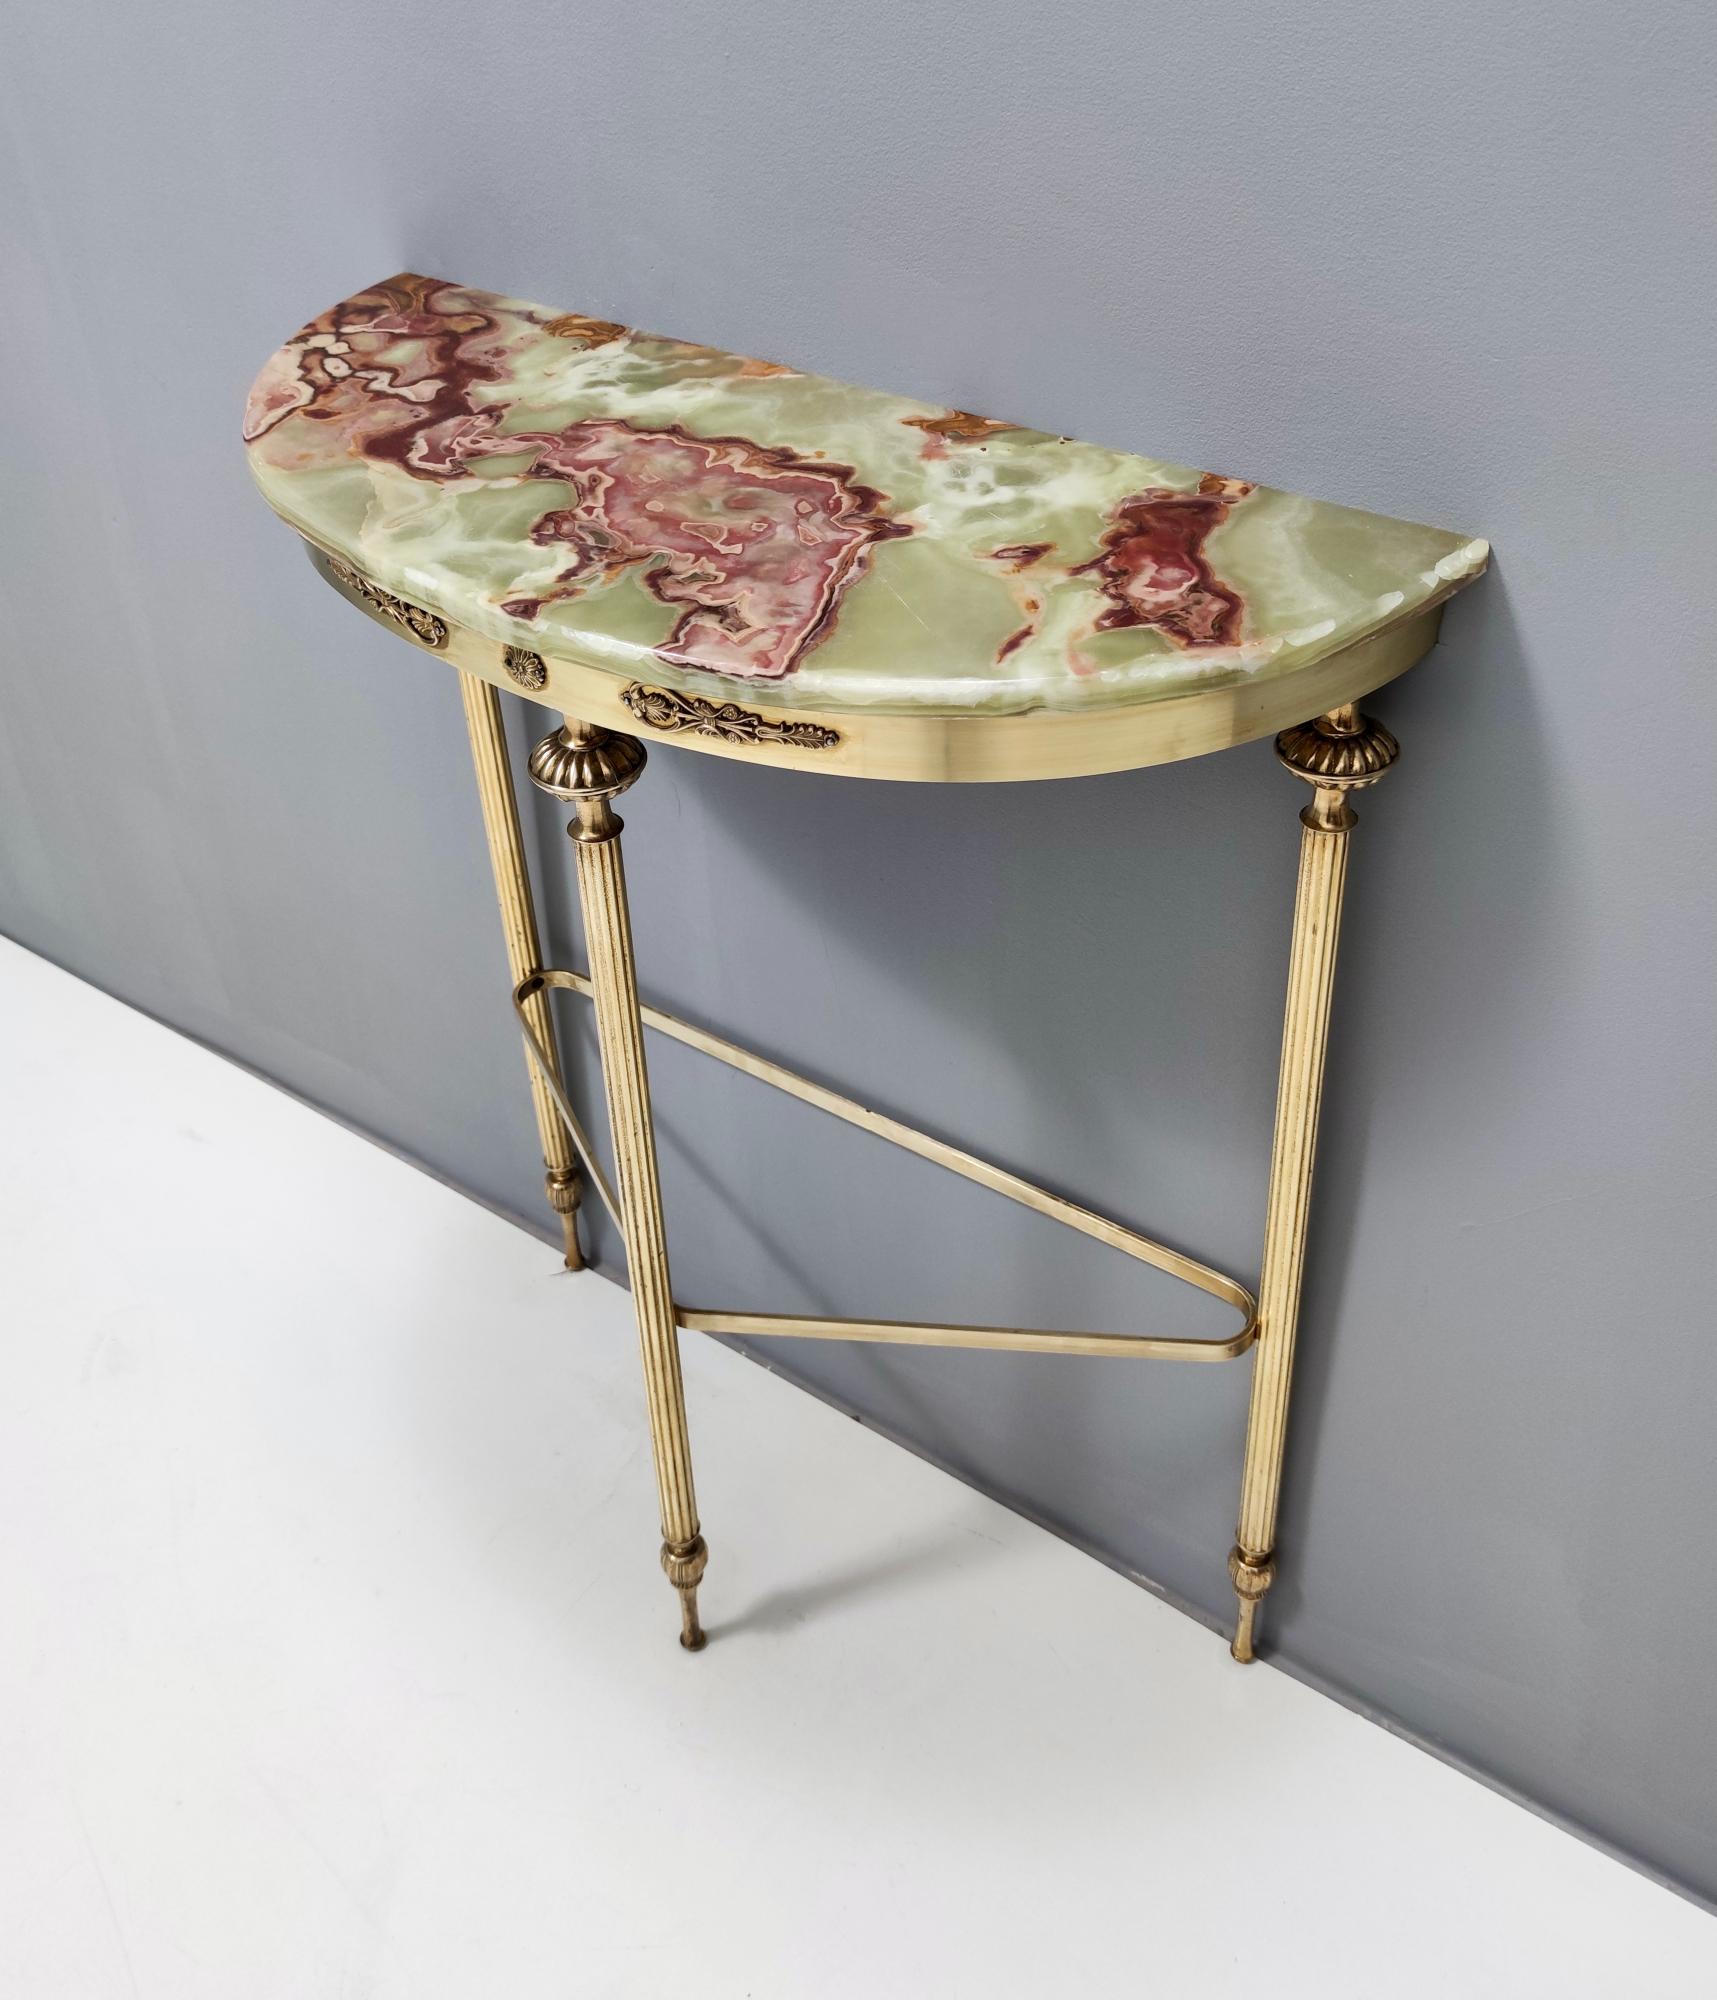 Mid-20th Century Midcentury Brass Console Table with a Demilune Red Veined Veined Onyx Top, Italy